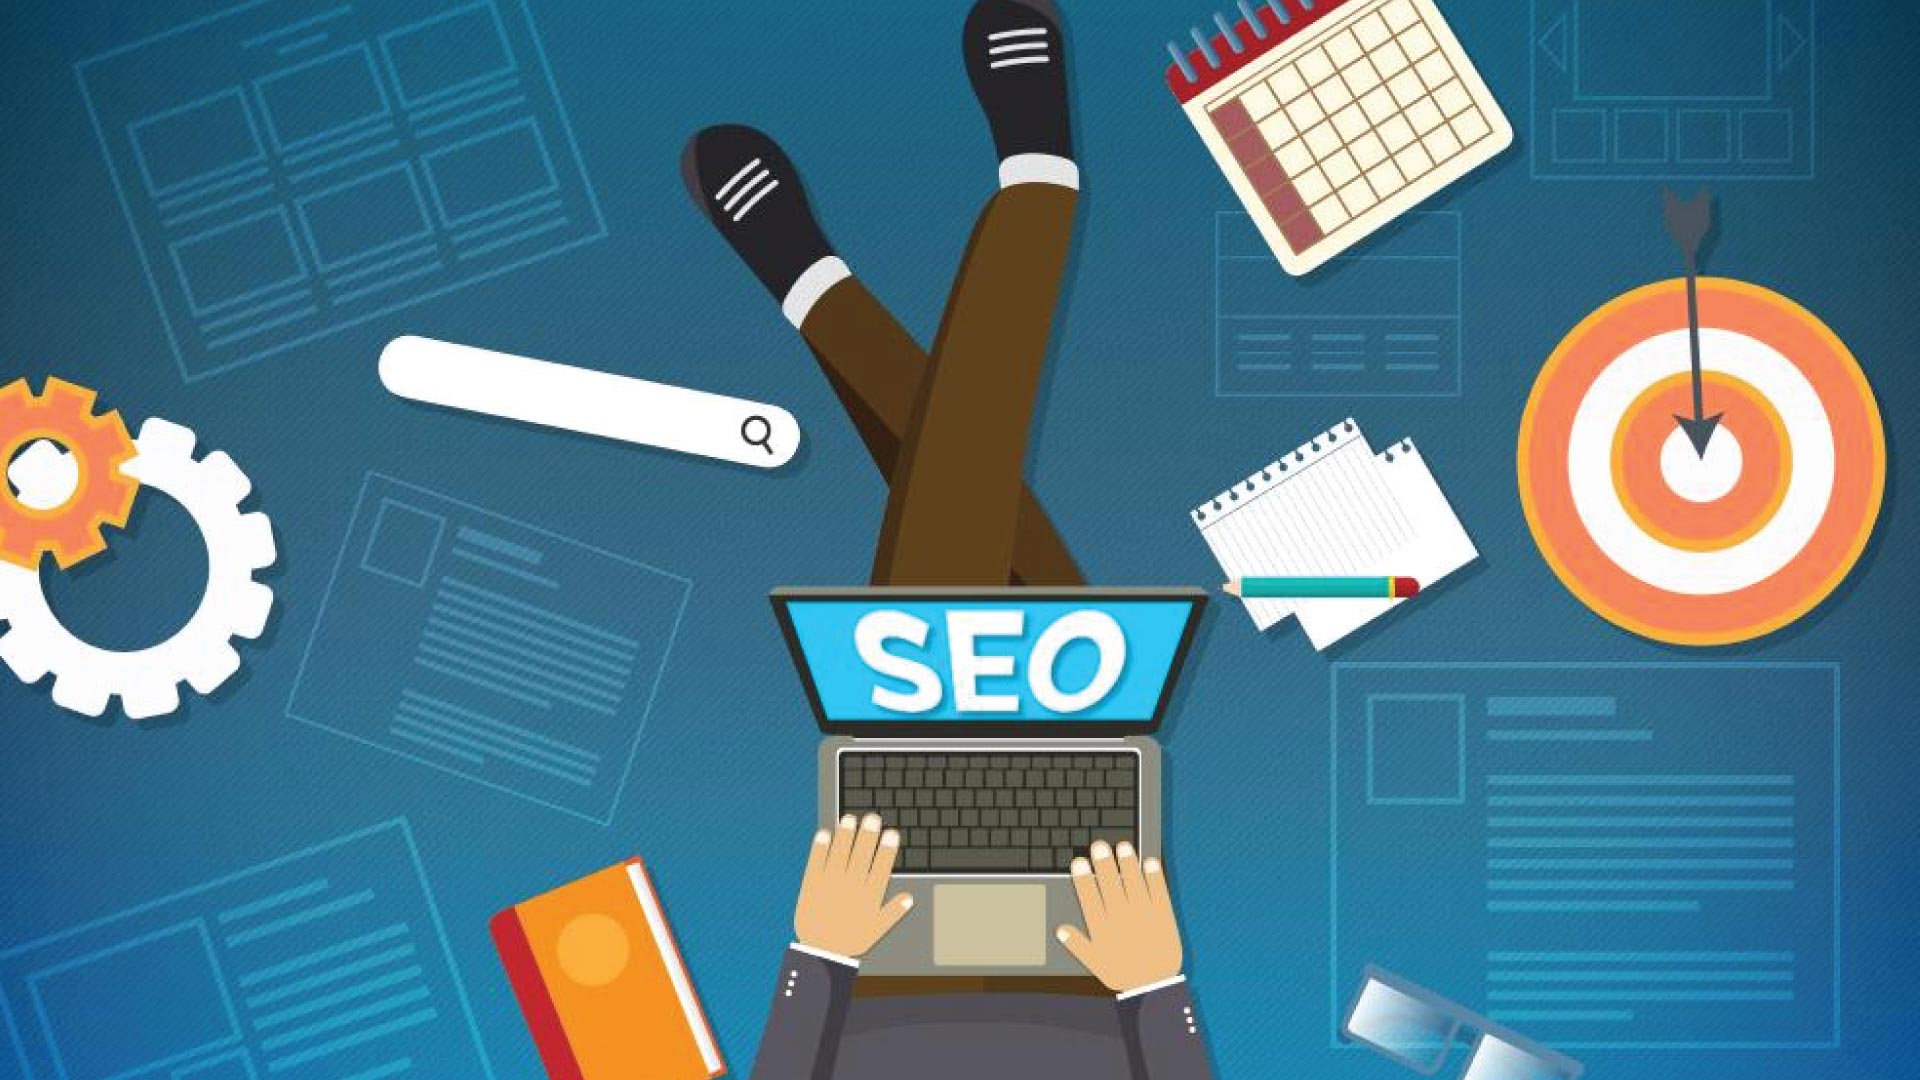 Dominate Search Results with The Help of a Professional SEO Service